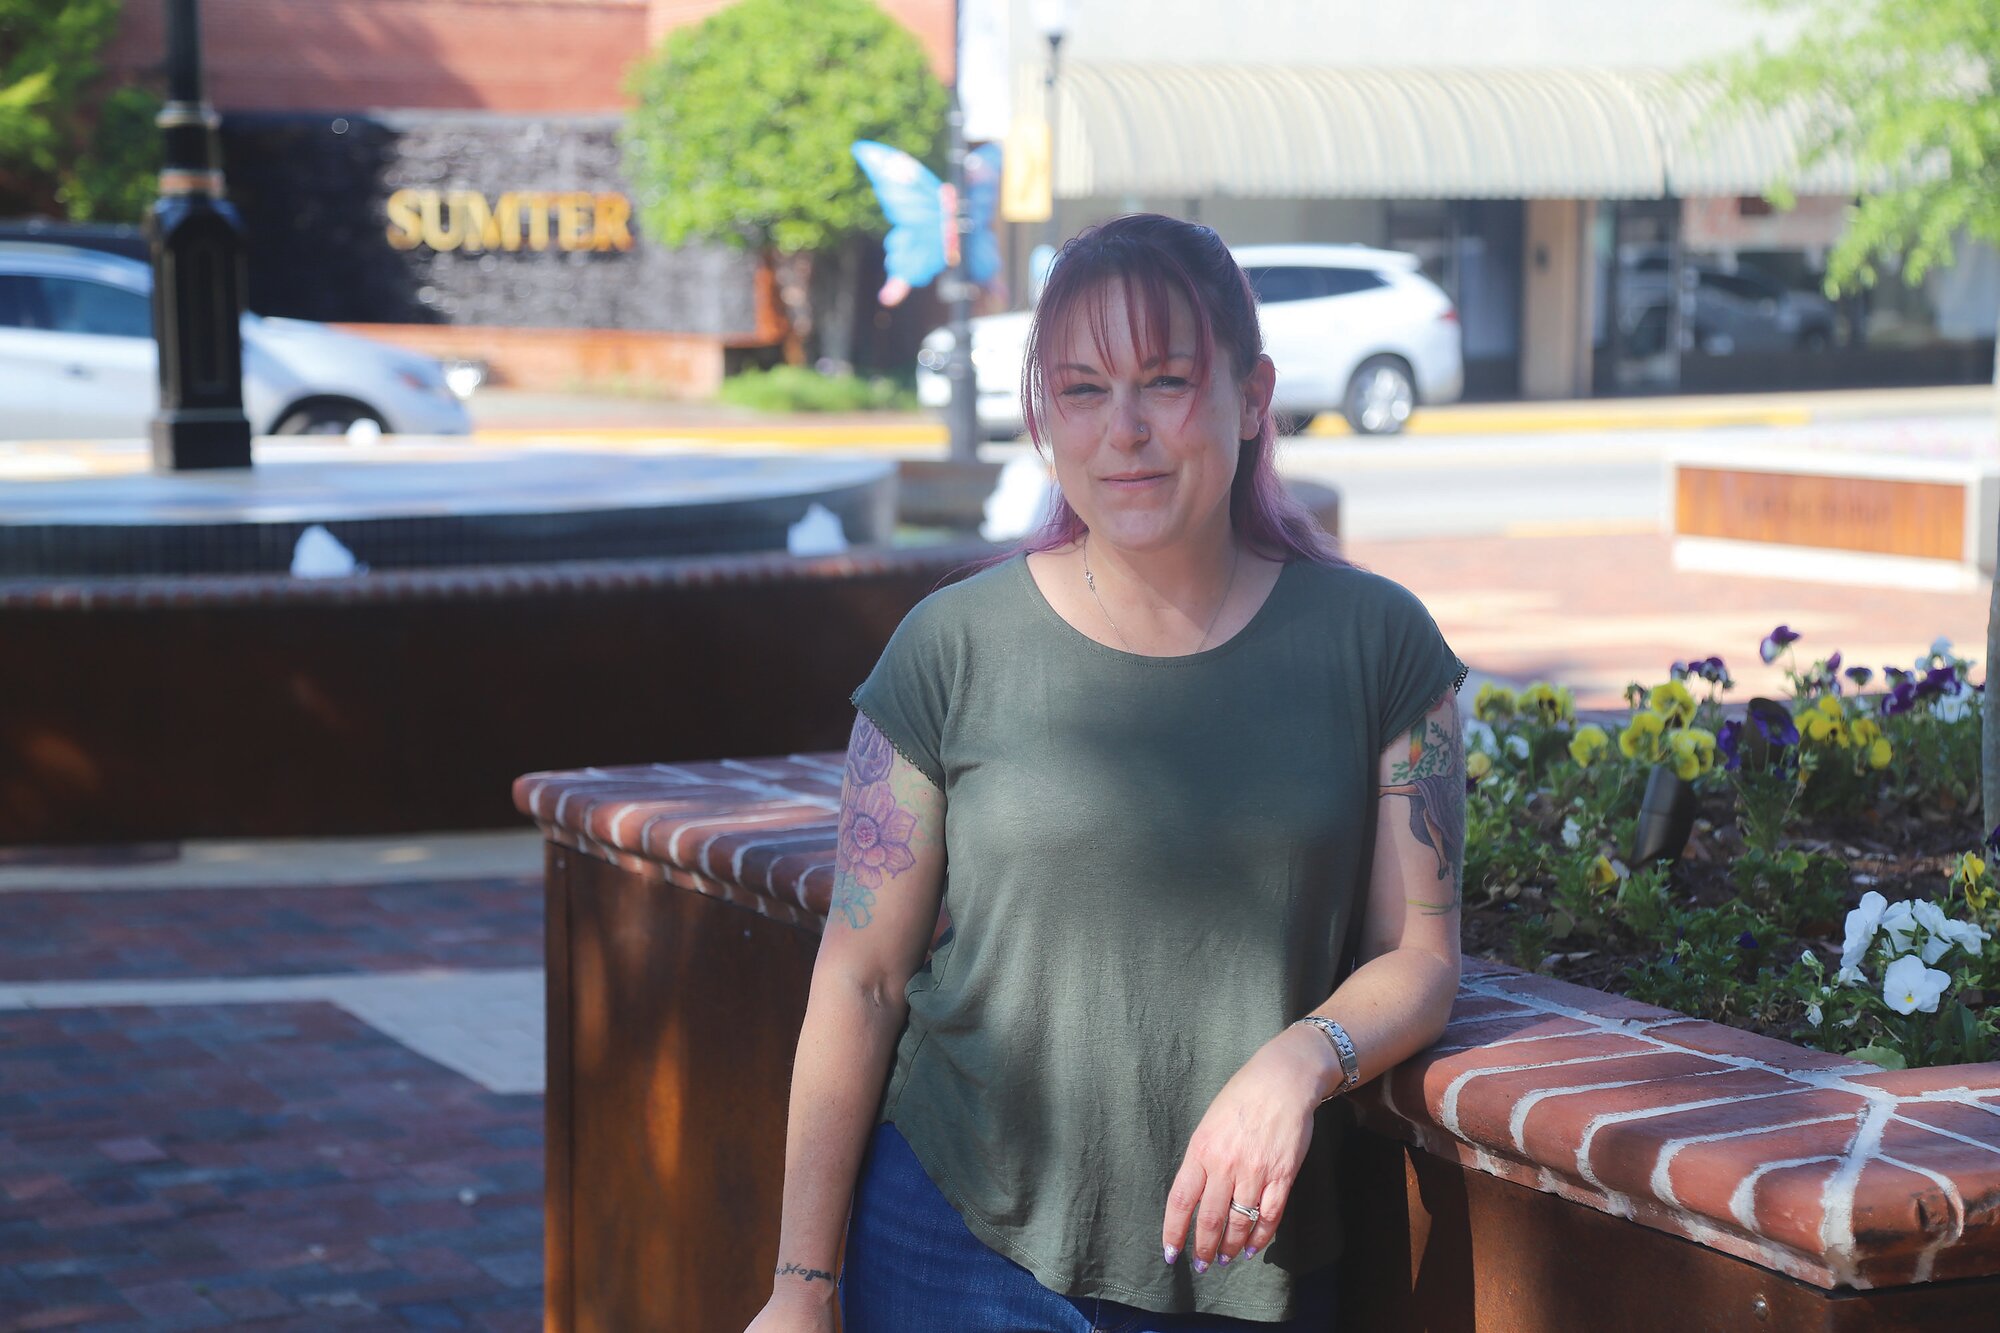 Sharlene Shuler will be opening a romance bookstore and wine bar at 9 S. Main St. this summer.